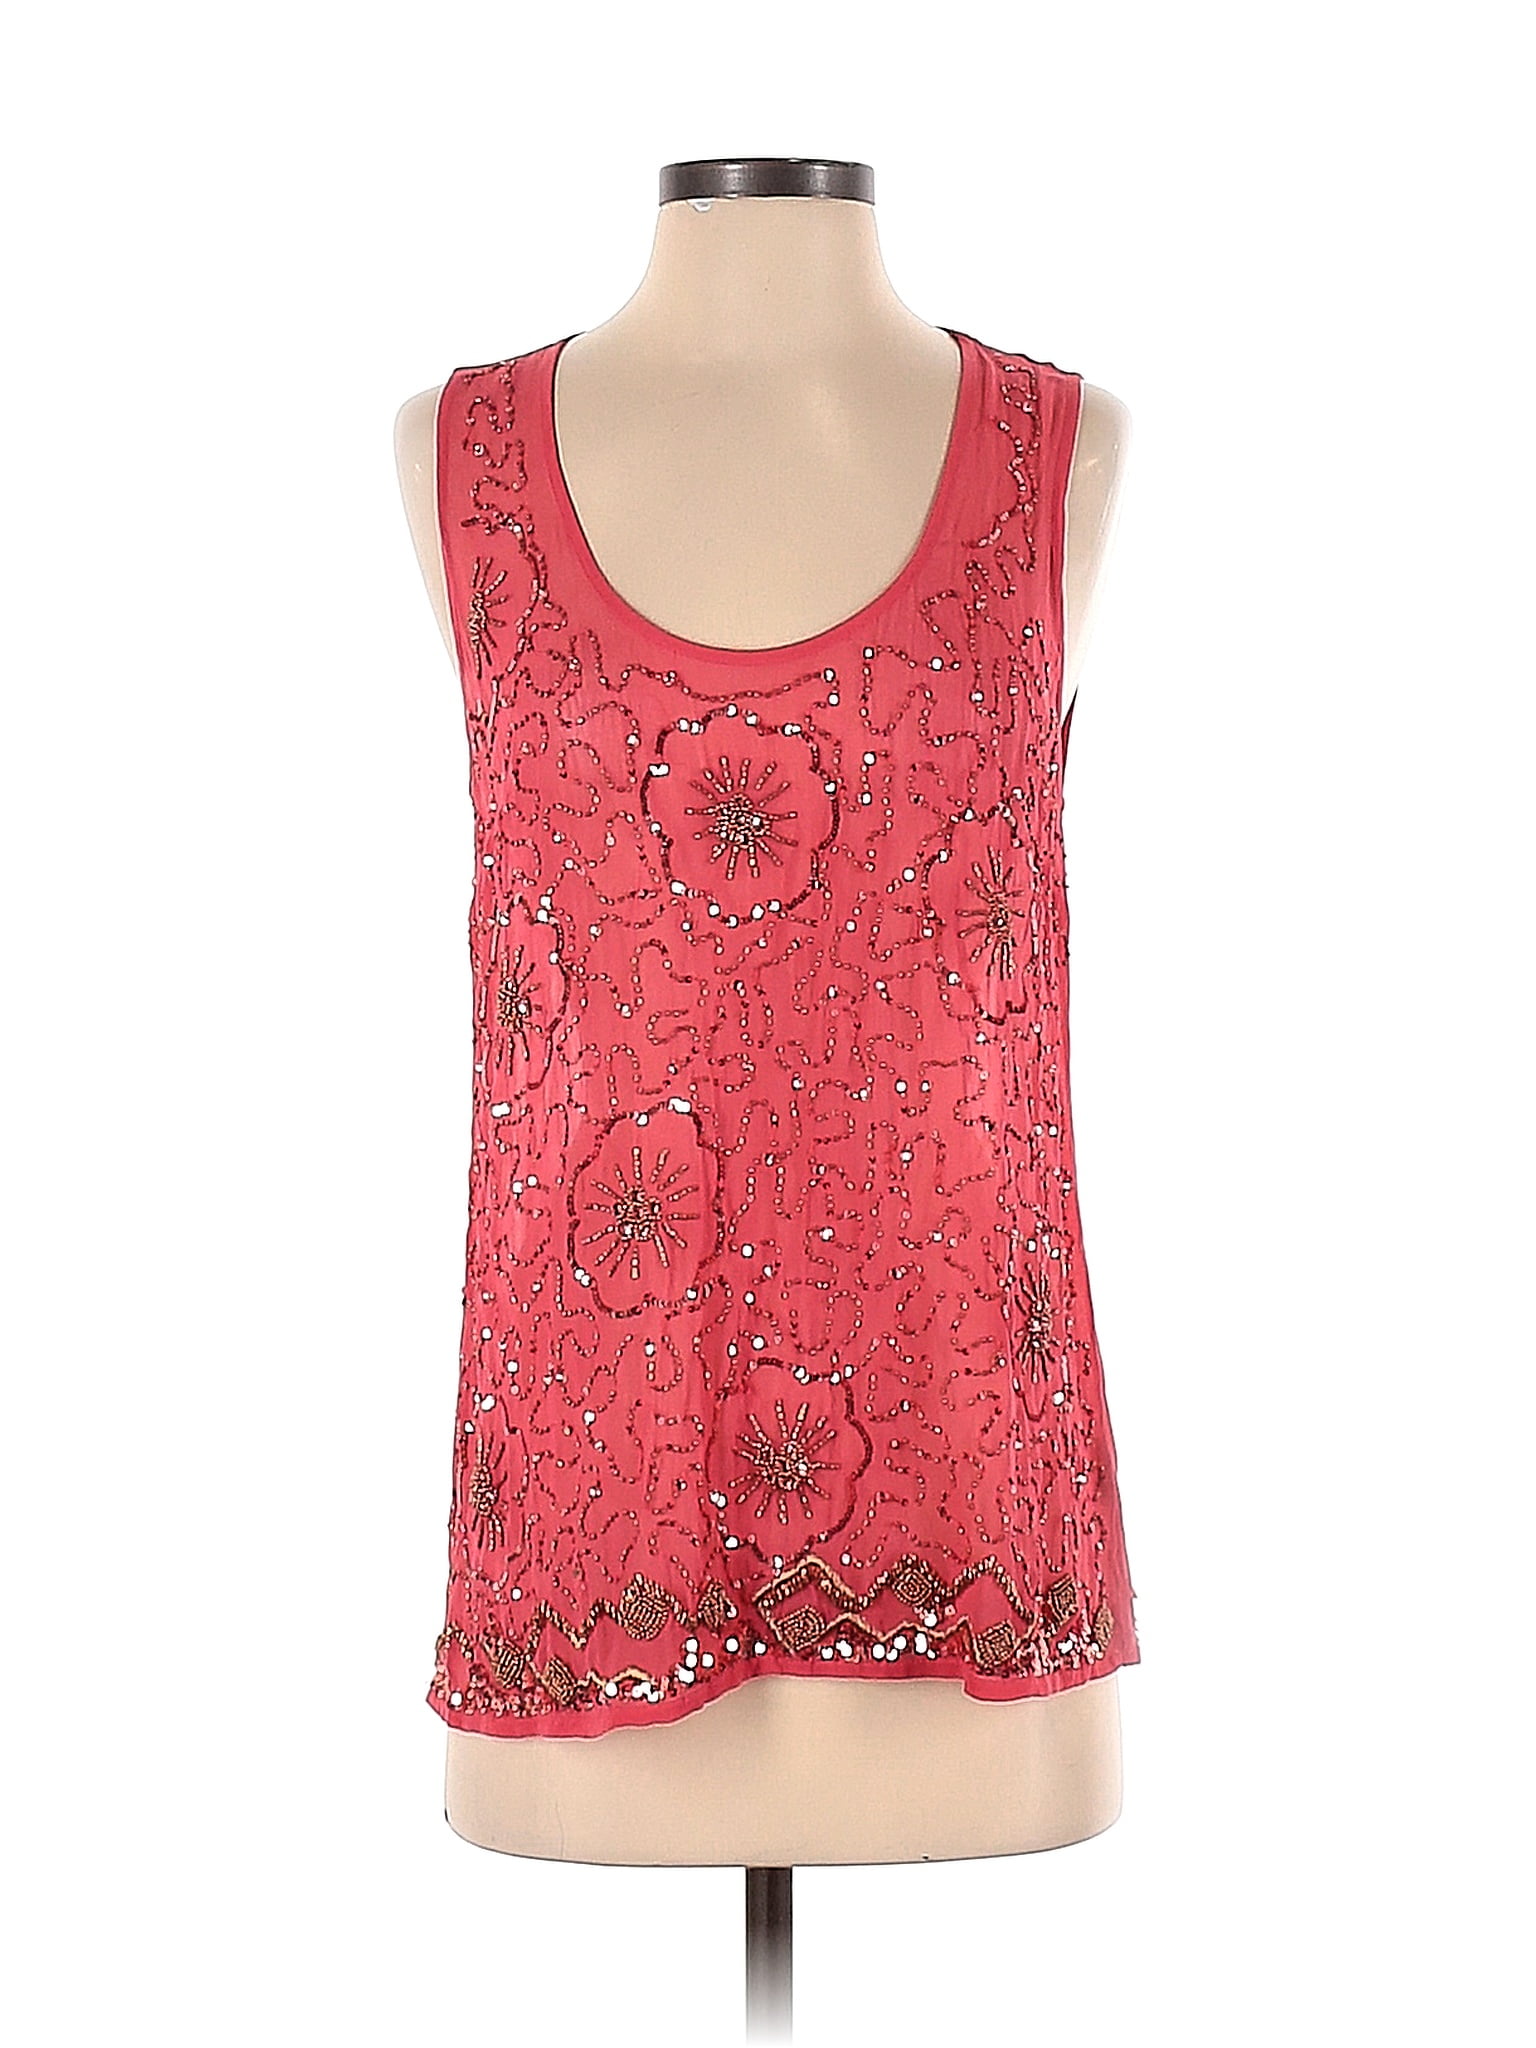 Moulinette Soeurs 100% Rayon Floral Red Sleeveless Blouse Size 2 - 75% ...